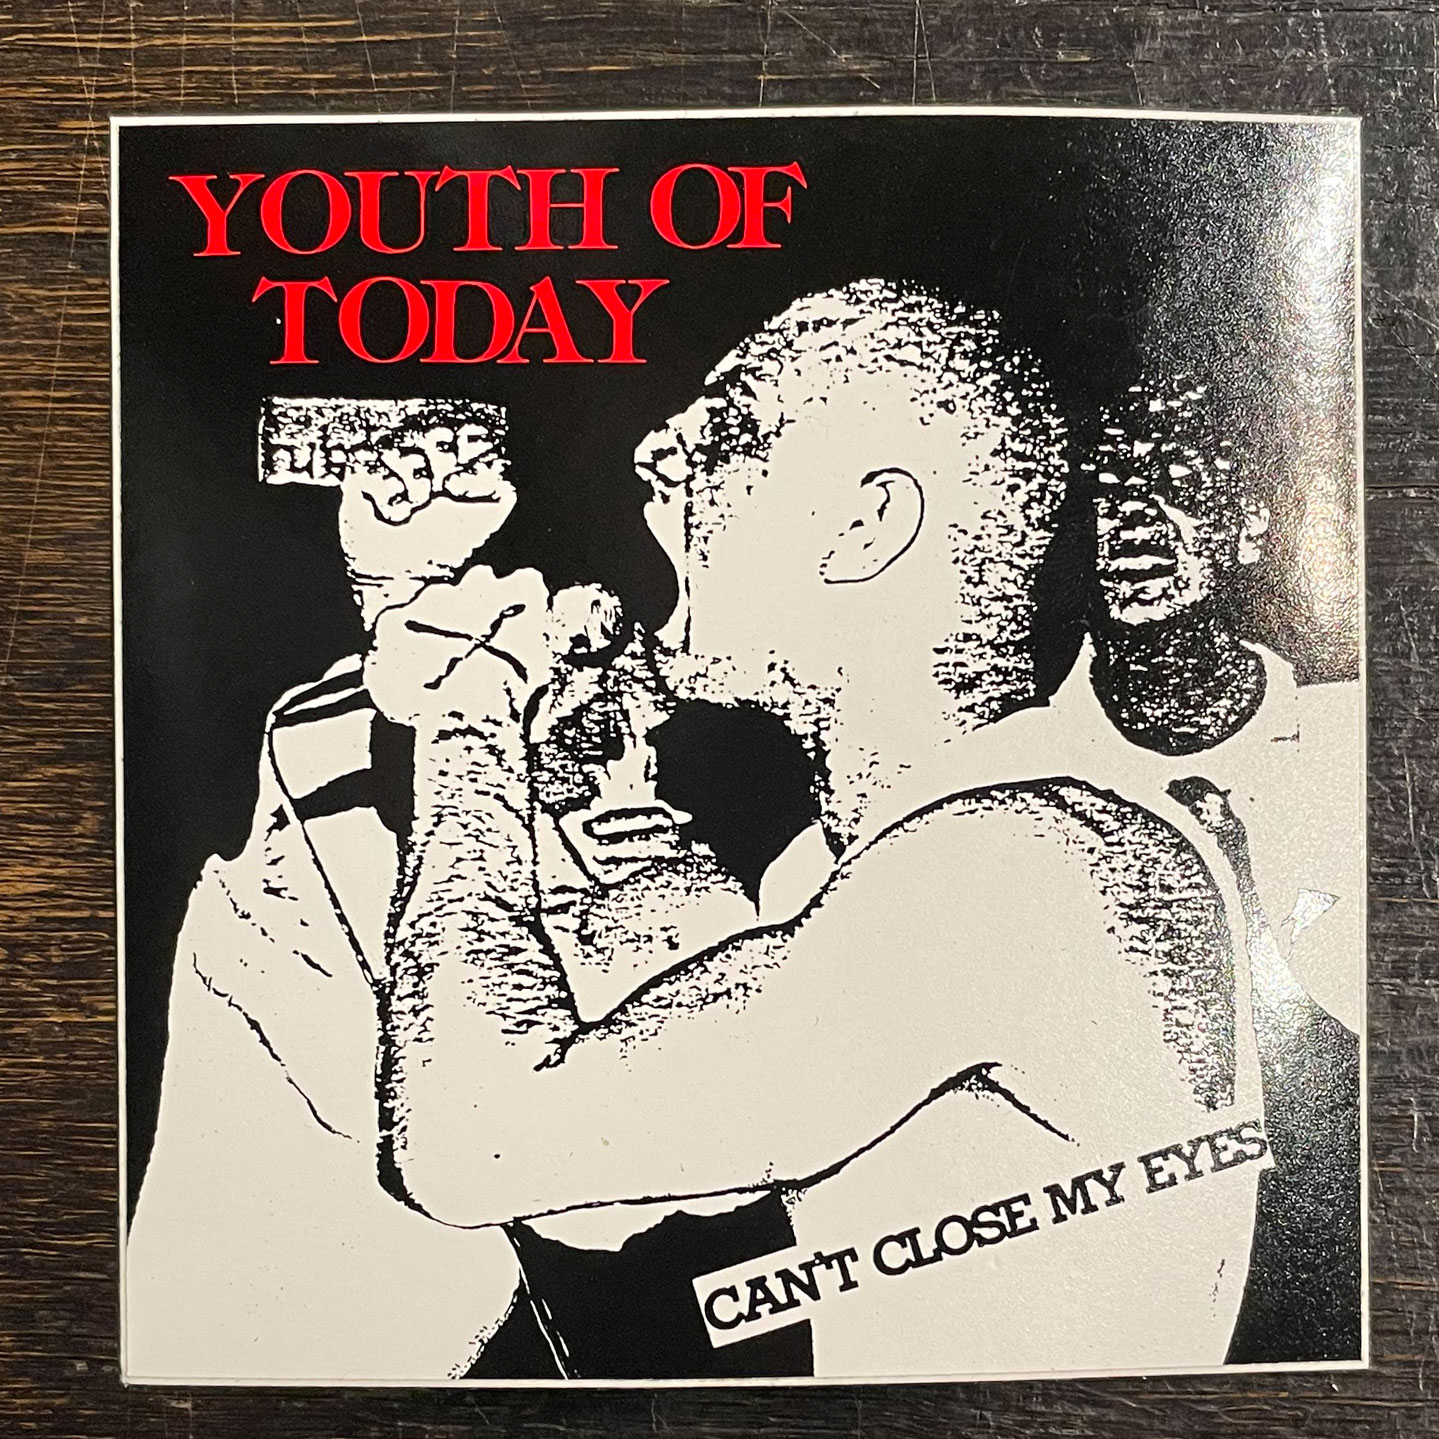 YOUTH OF TODAY ステッカー CAN'T CLOSE MY EYES